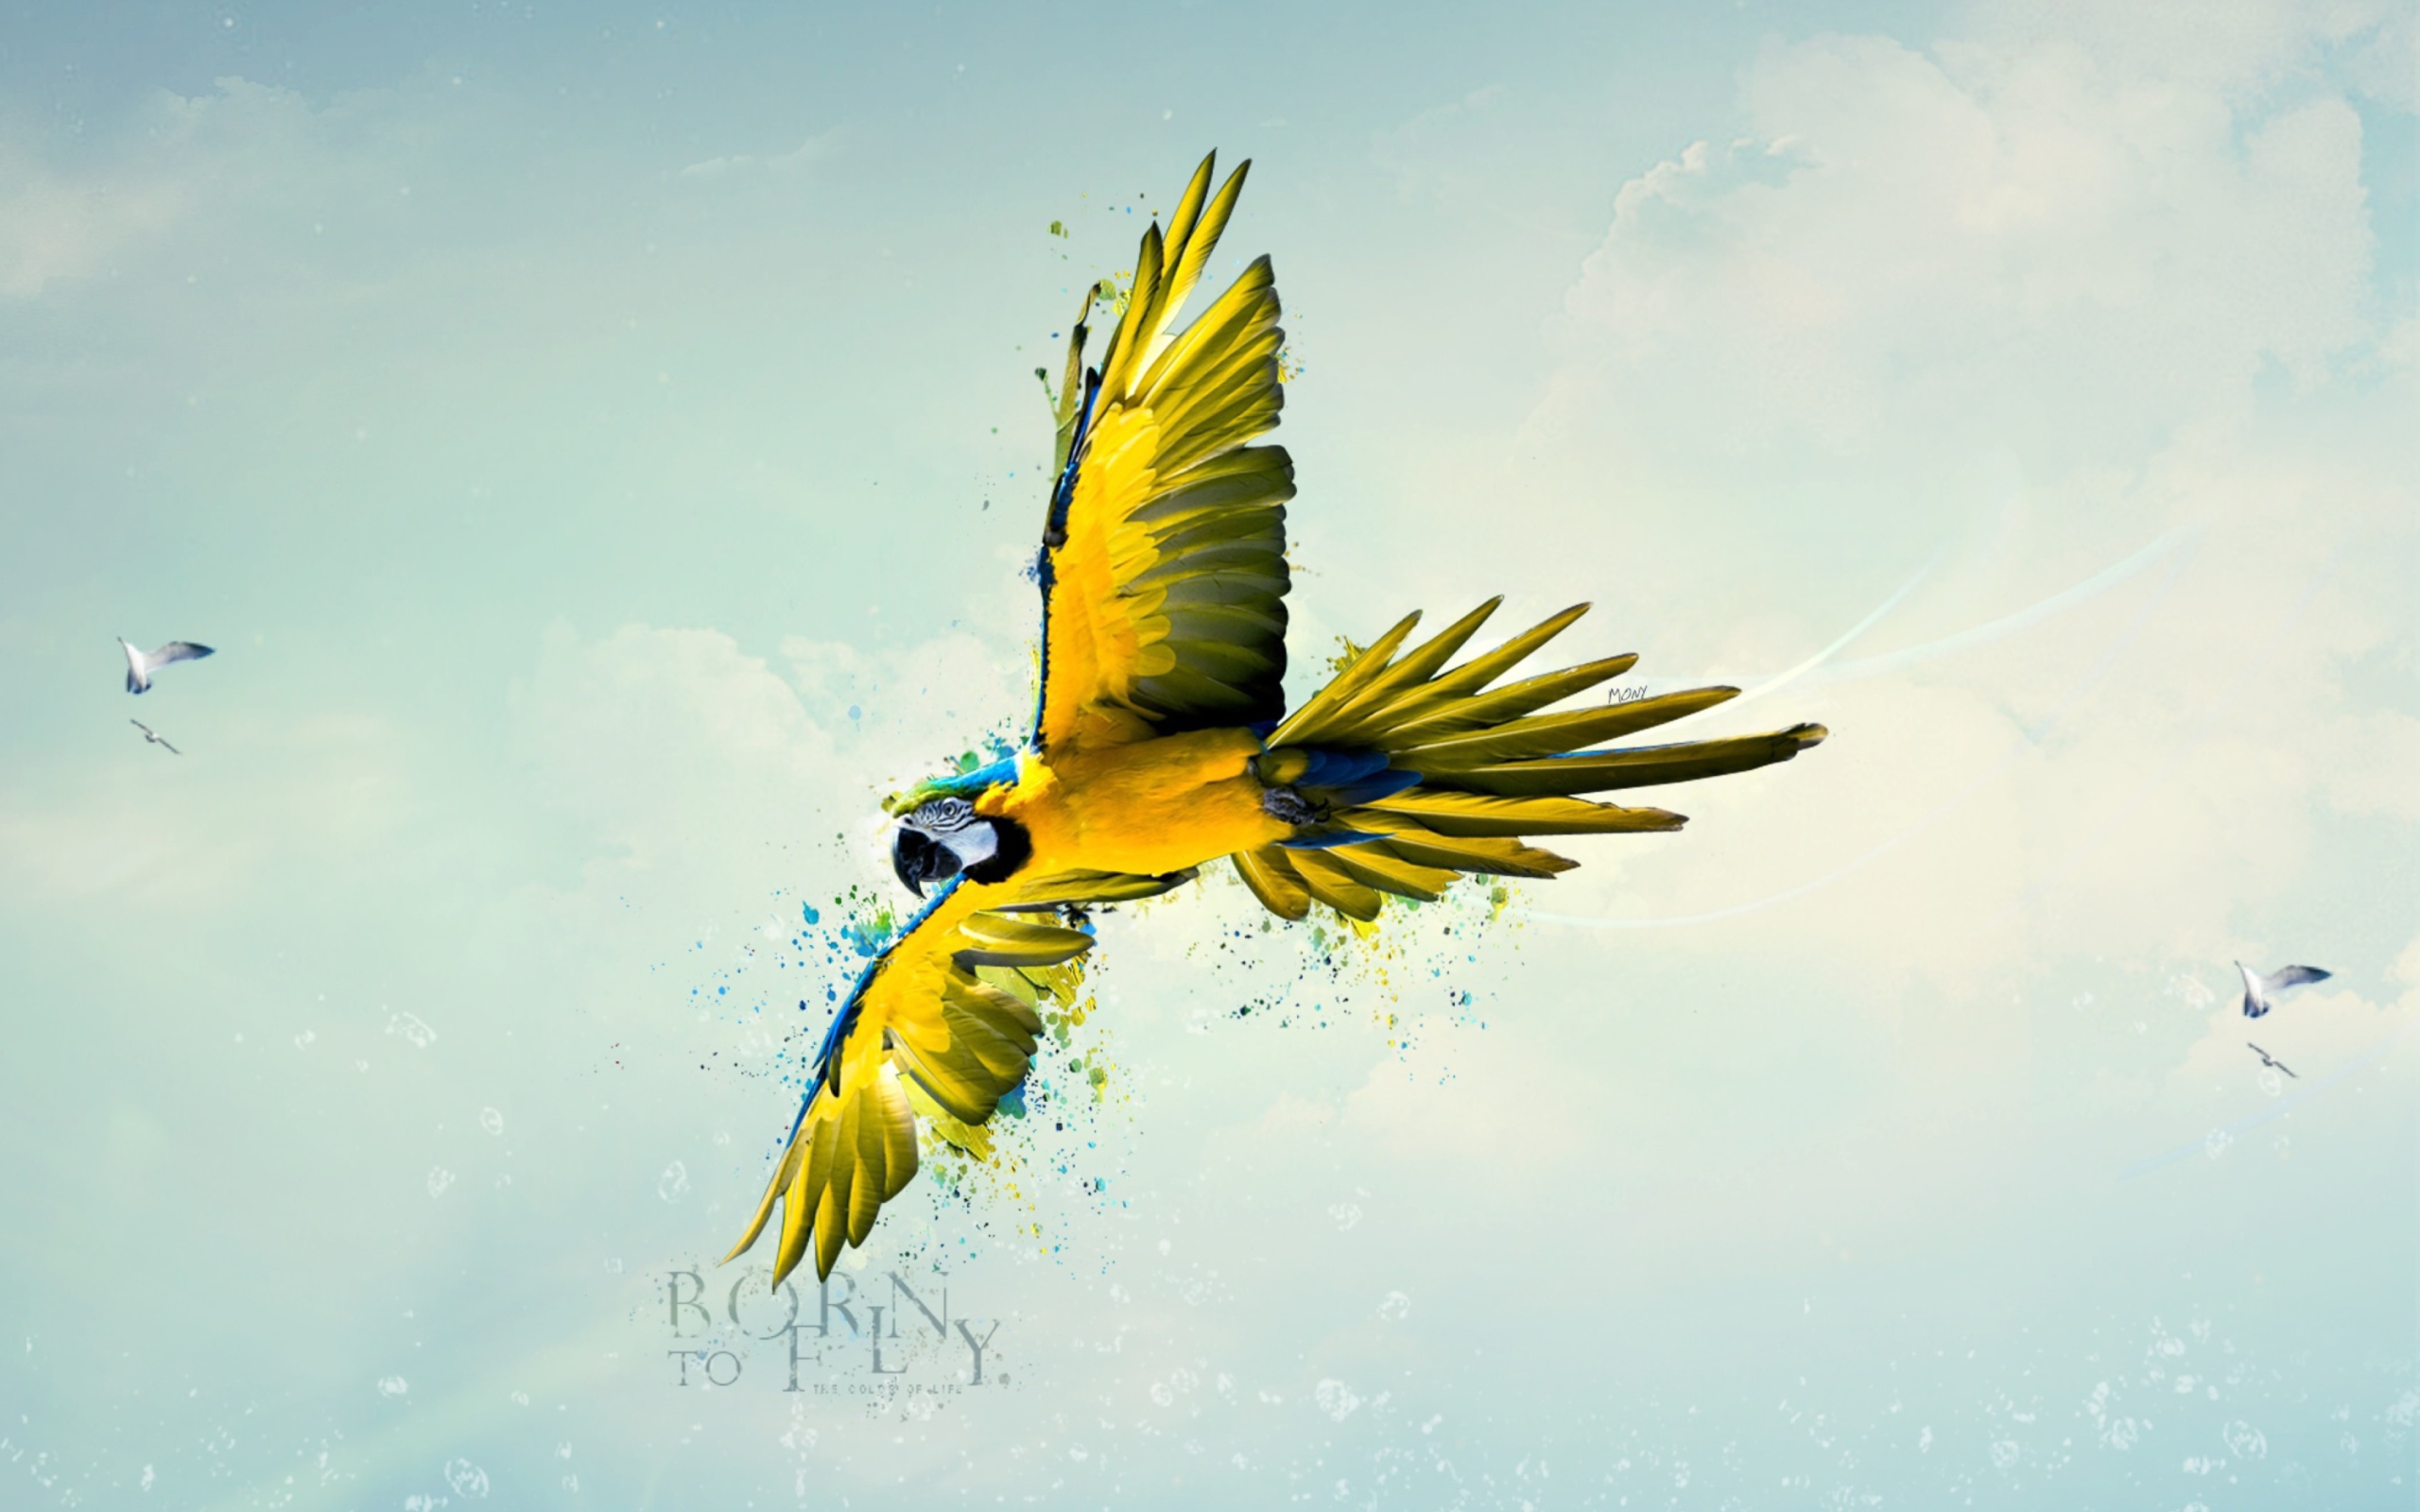 Born To Fly wallpaper 2560x1600